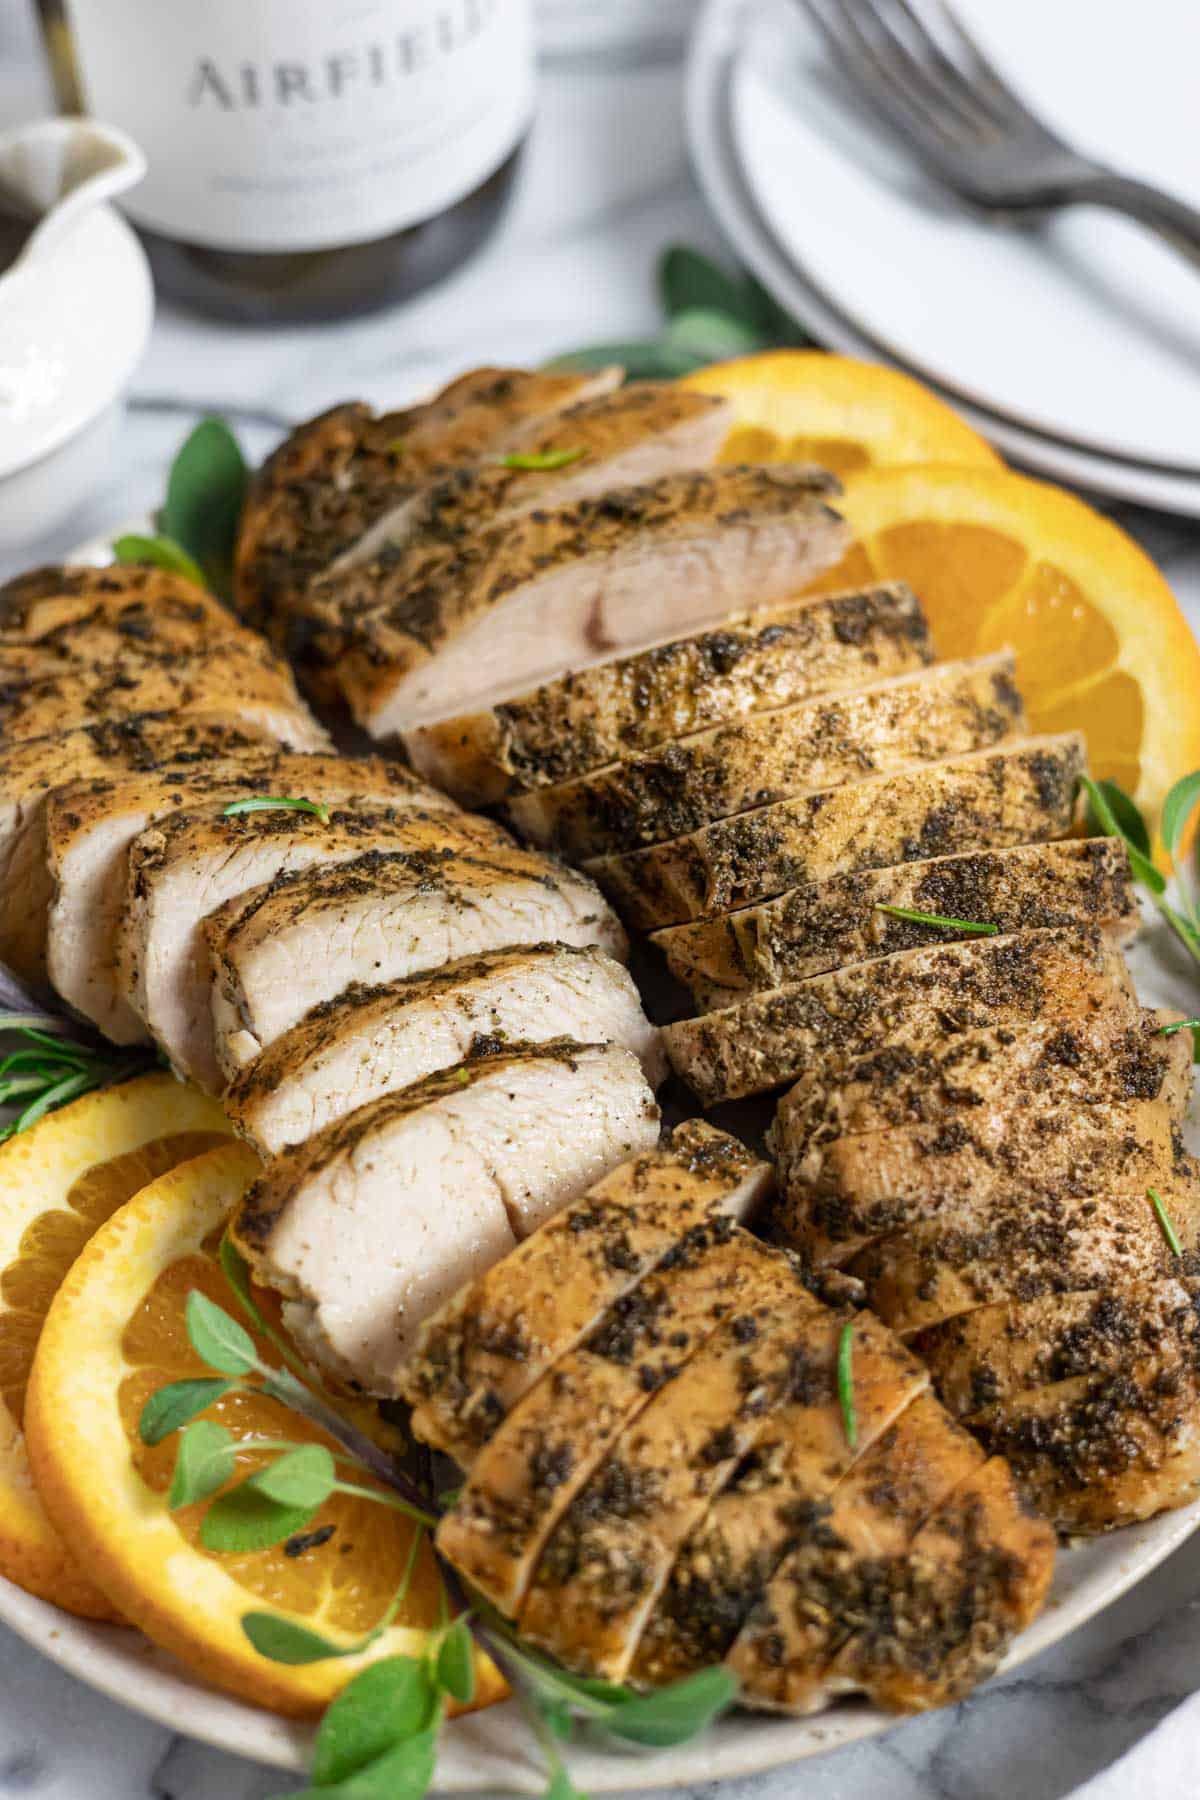 Slow cooker seasoned turkey breast tenders sliced on a plate with herbs and orange slices.